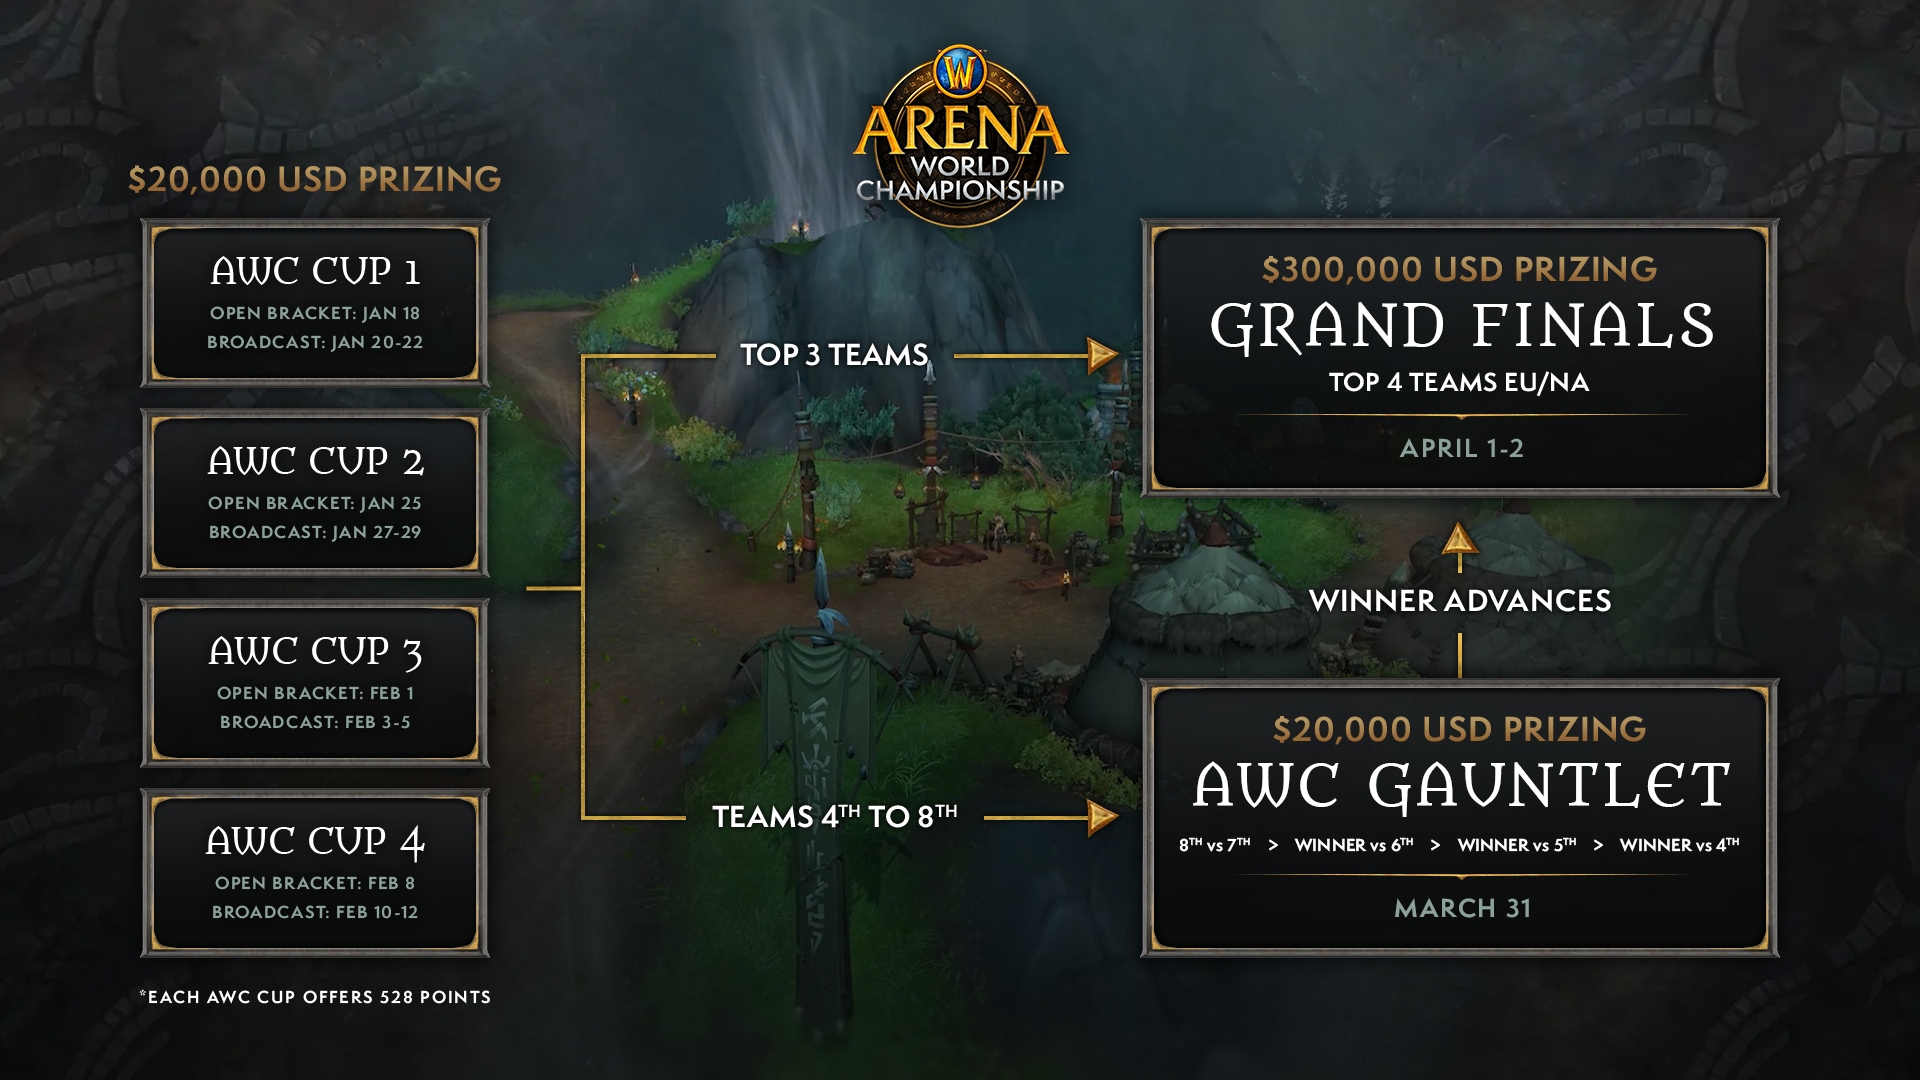 Visual representing the 4 AWC Cups, with Top 3 teams heading to Grand Finals and Teams 4-8 moving to the AWC Gauntlet to earn the final Grand Finals spot